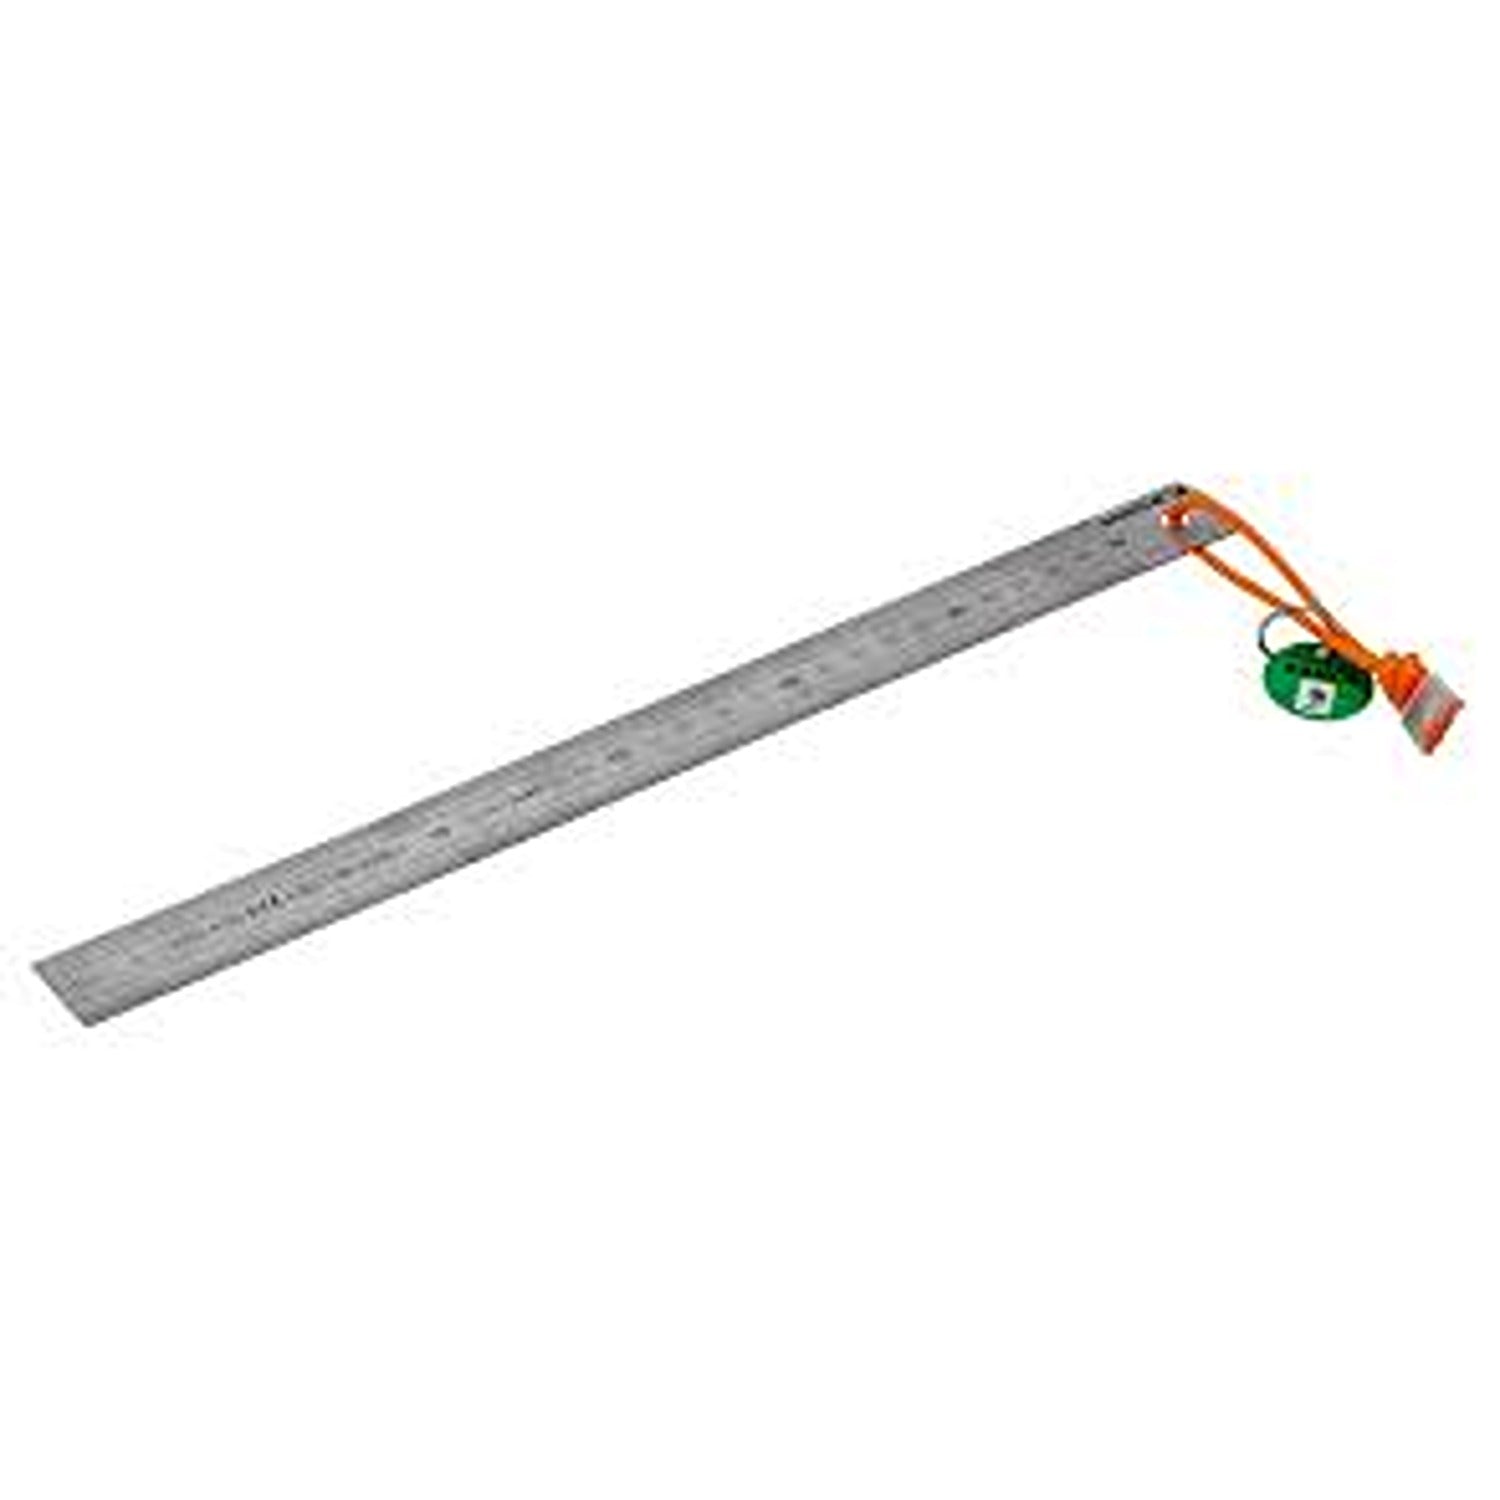 BAHCO TAHSRMM Metric Stainless Steel Ruler with Dyneema Textile - Premium Ruler from BAHCO - Shop now at Yew Aik.